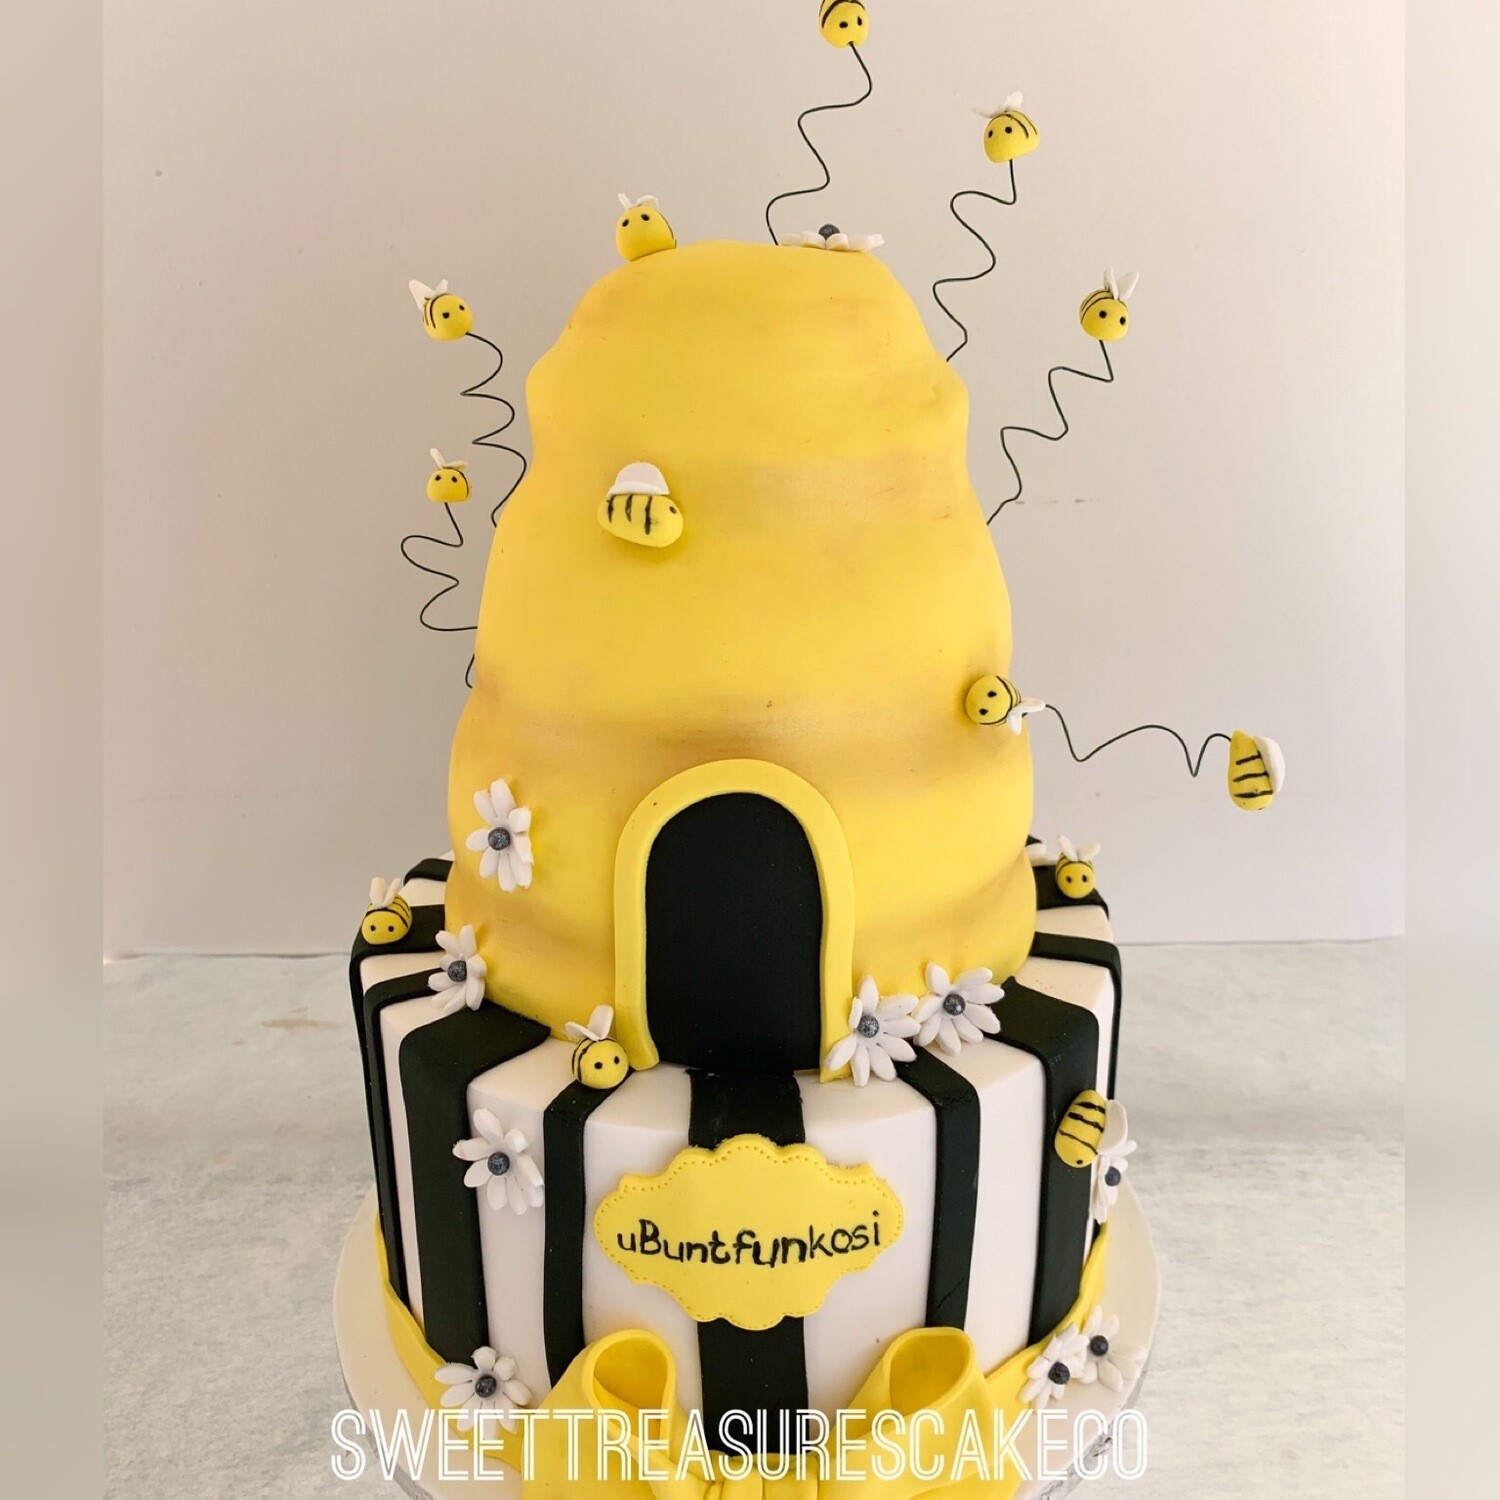 Beehive Babyshower 2 tier cake, Size: 5&amp;7 inches (12&amp;18cm wide per tier) 3 layers cake, 2 layers of filling per tier: up to 15 Servings, Upsize (Add Layer to make taller and serve more guests);: No thank you